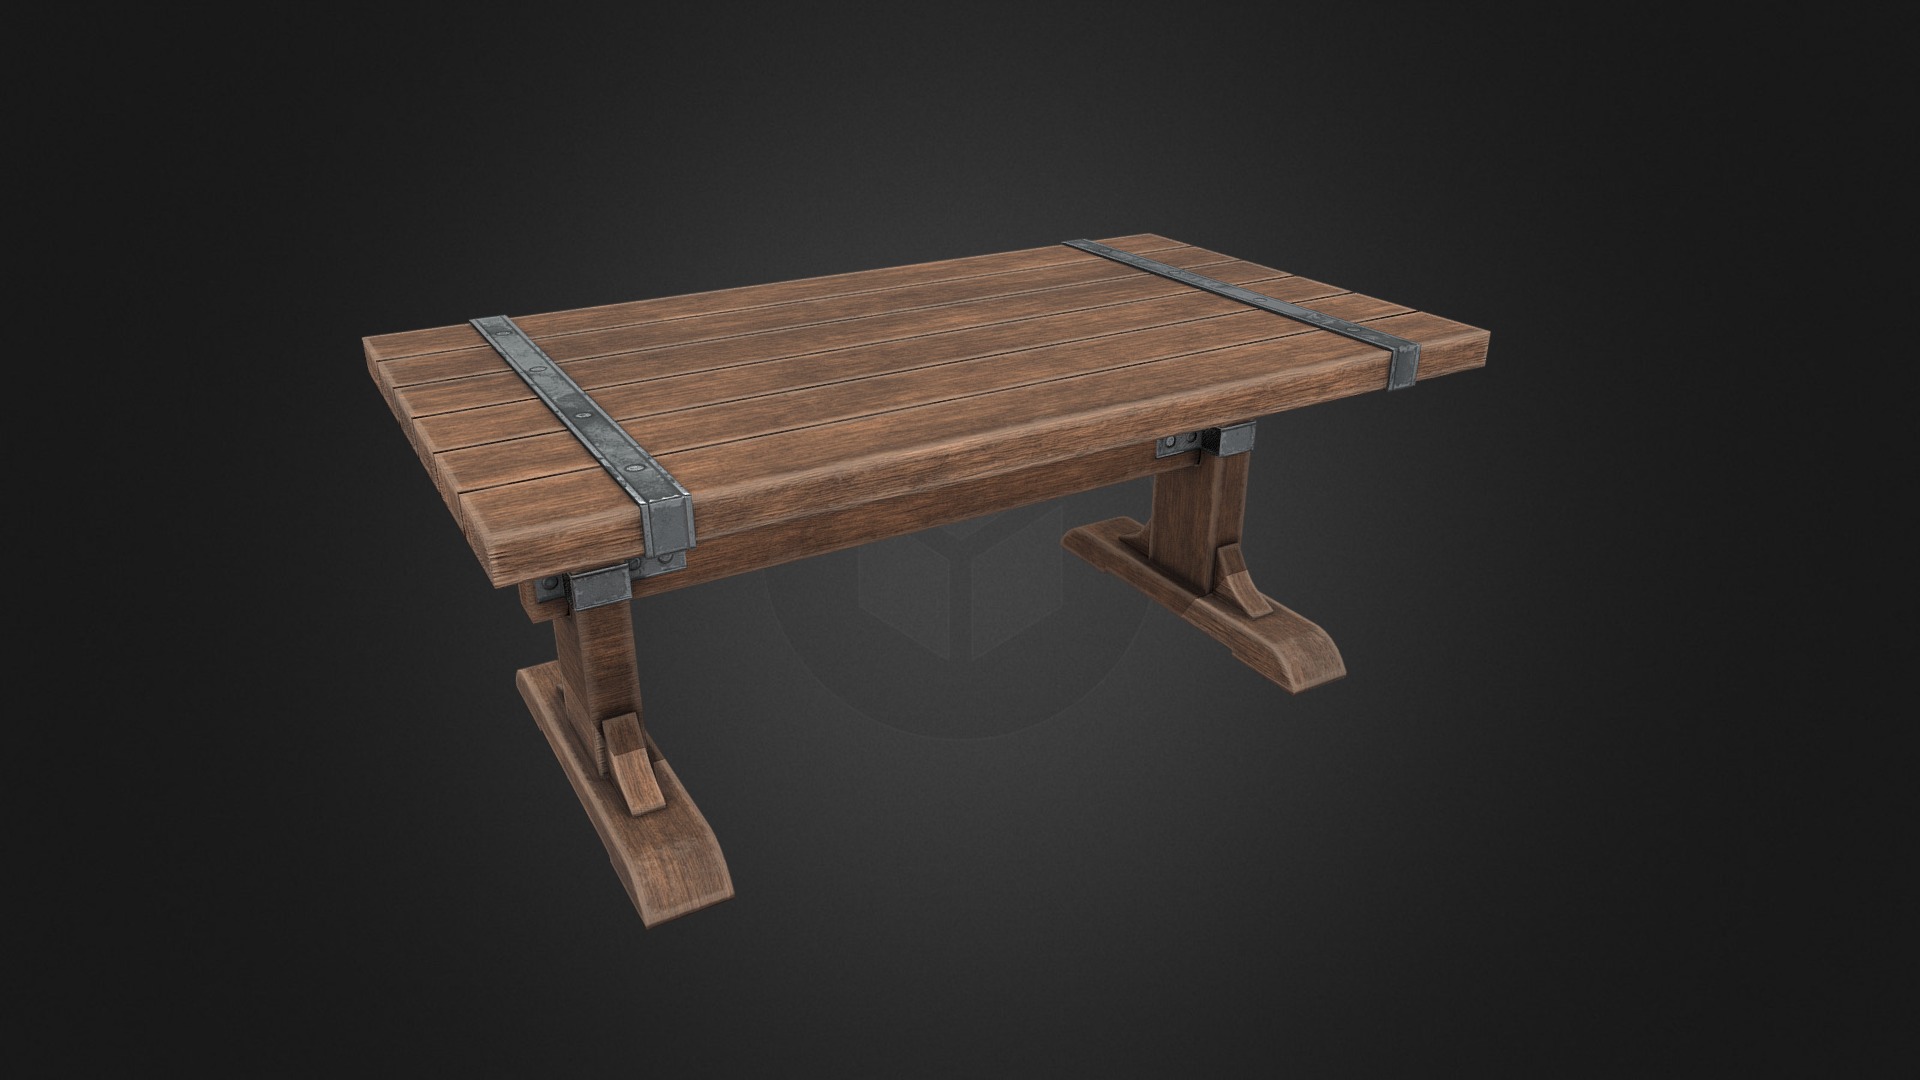 3D model Wood Table - This is a 3D model of the Wood Table. The 3D model is about a wooden table with a metal frame.